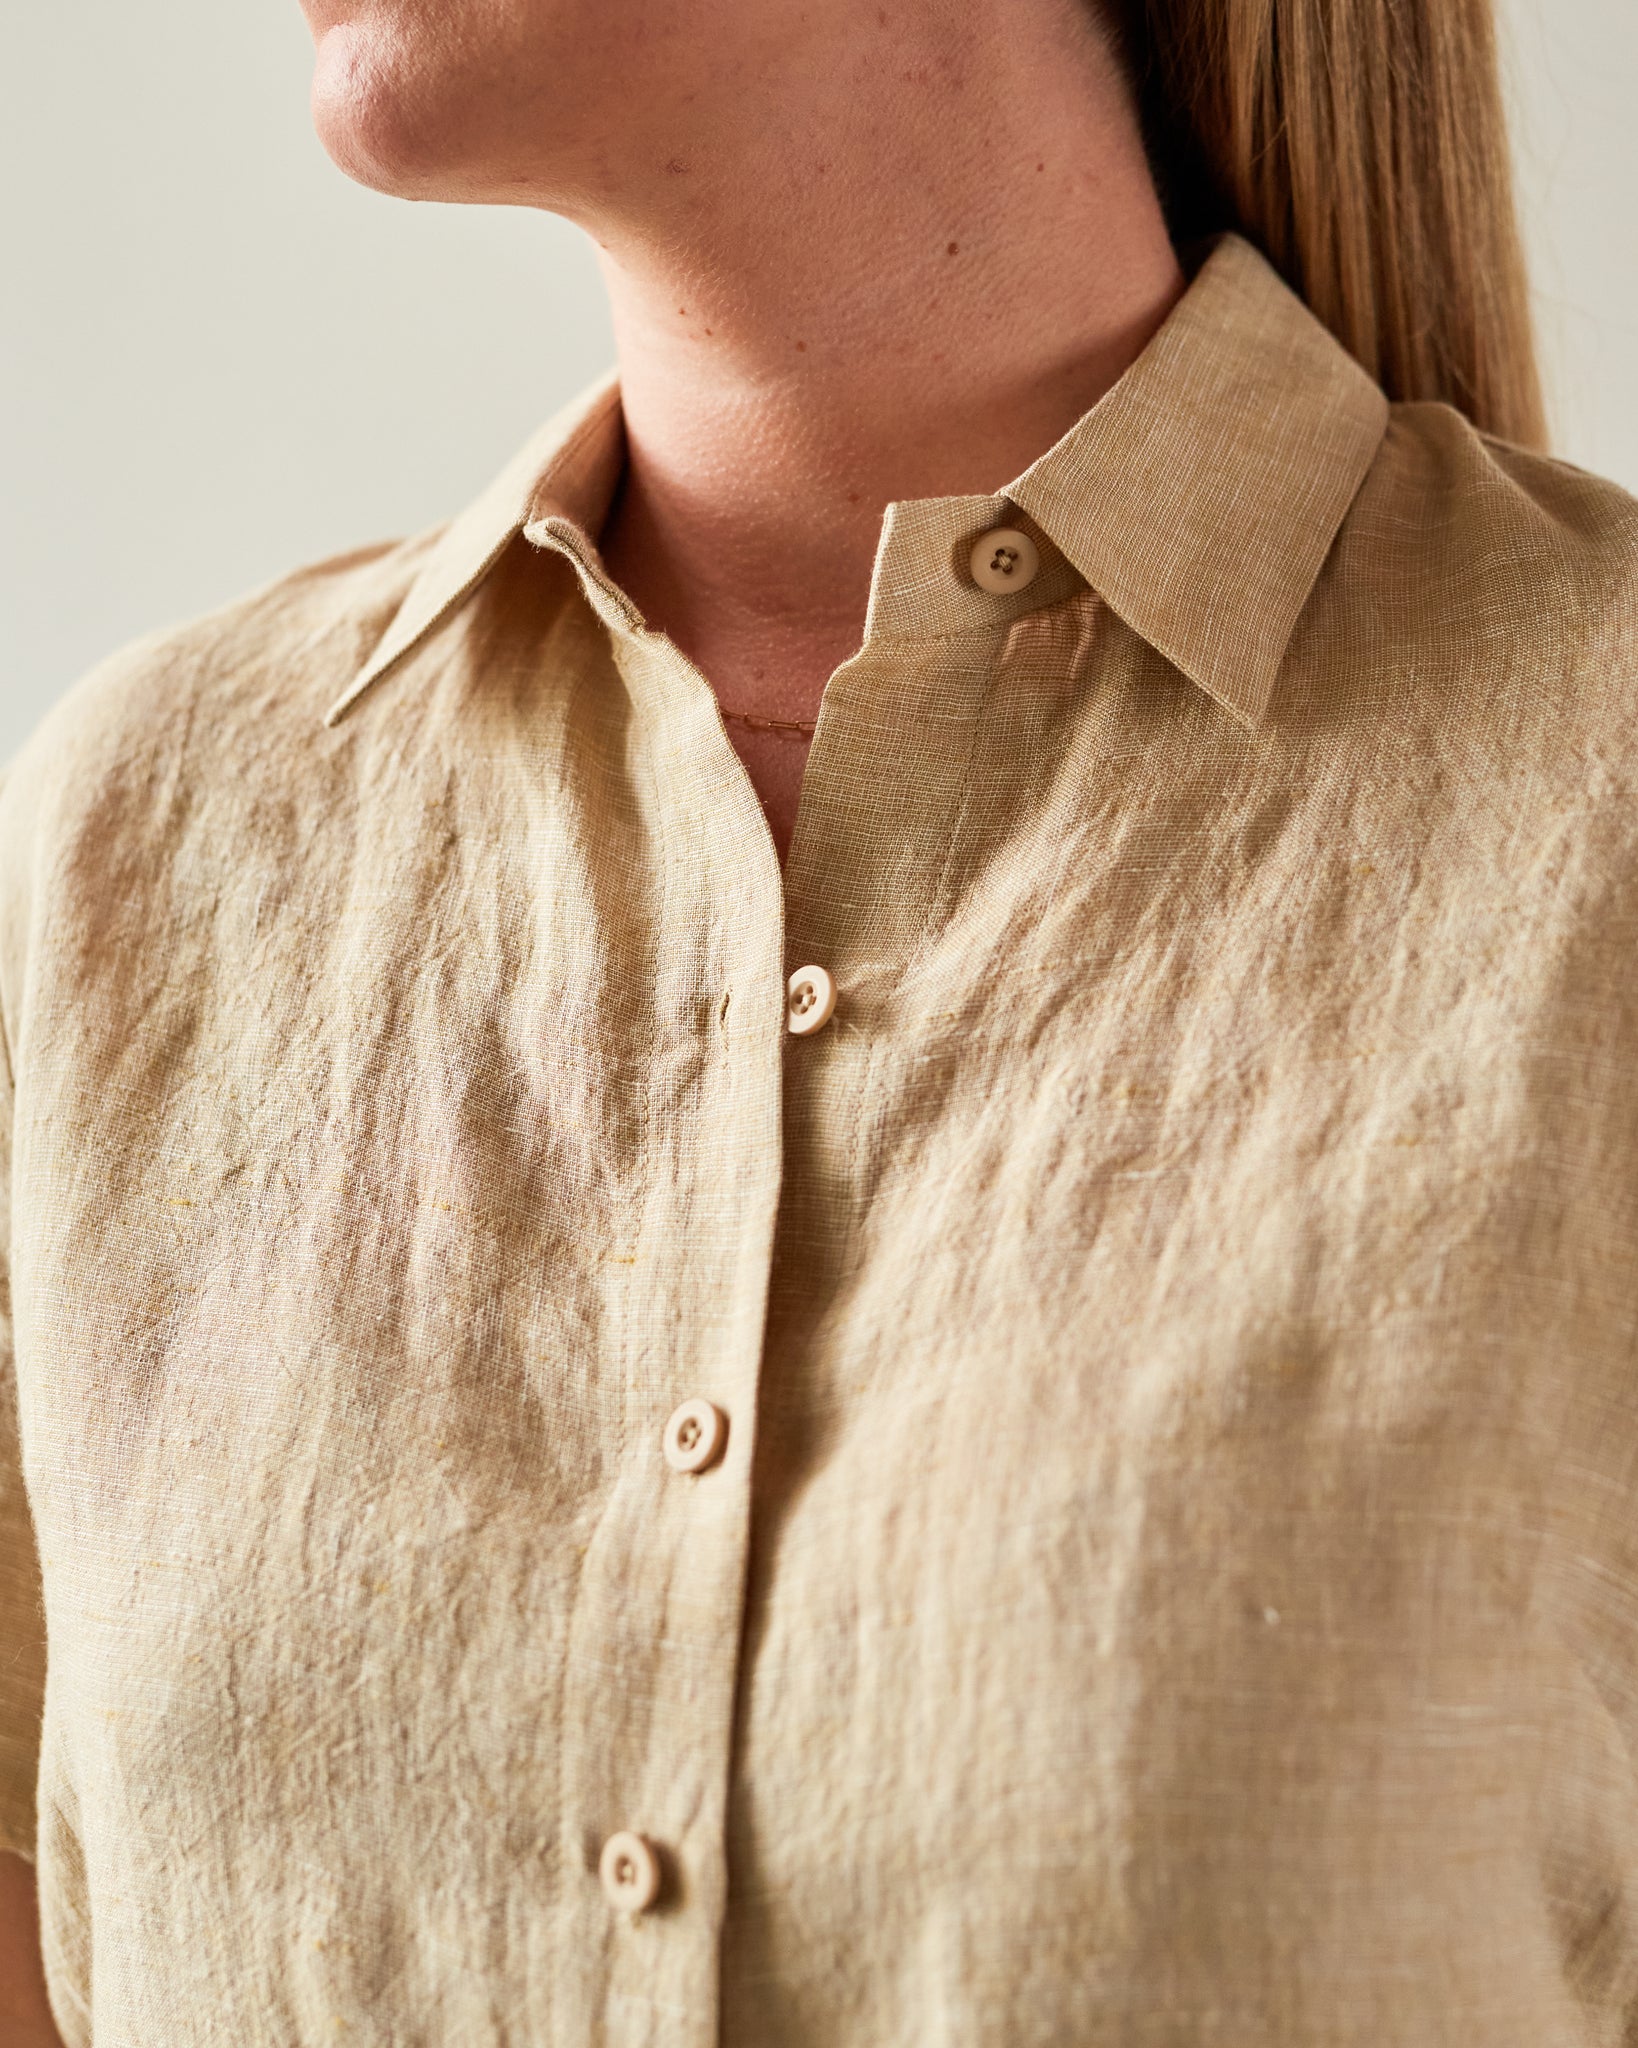 7115 Cropped Button Down Shirt, Mustard Noise